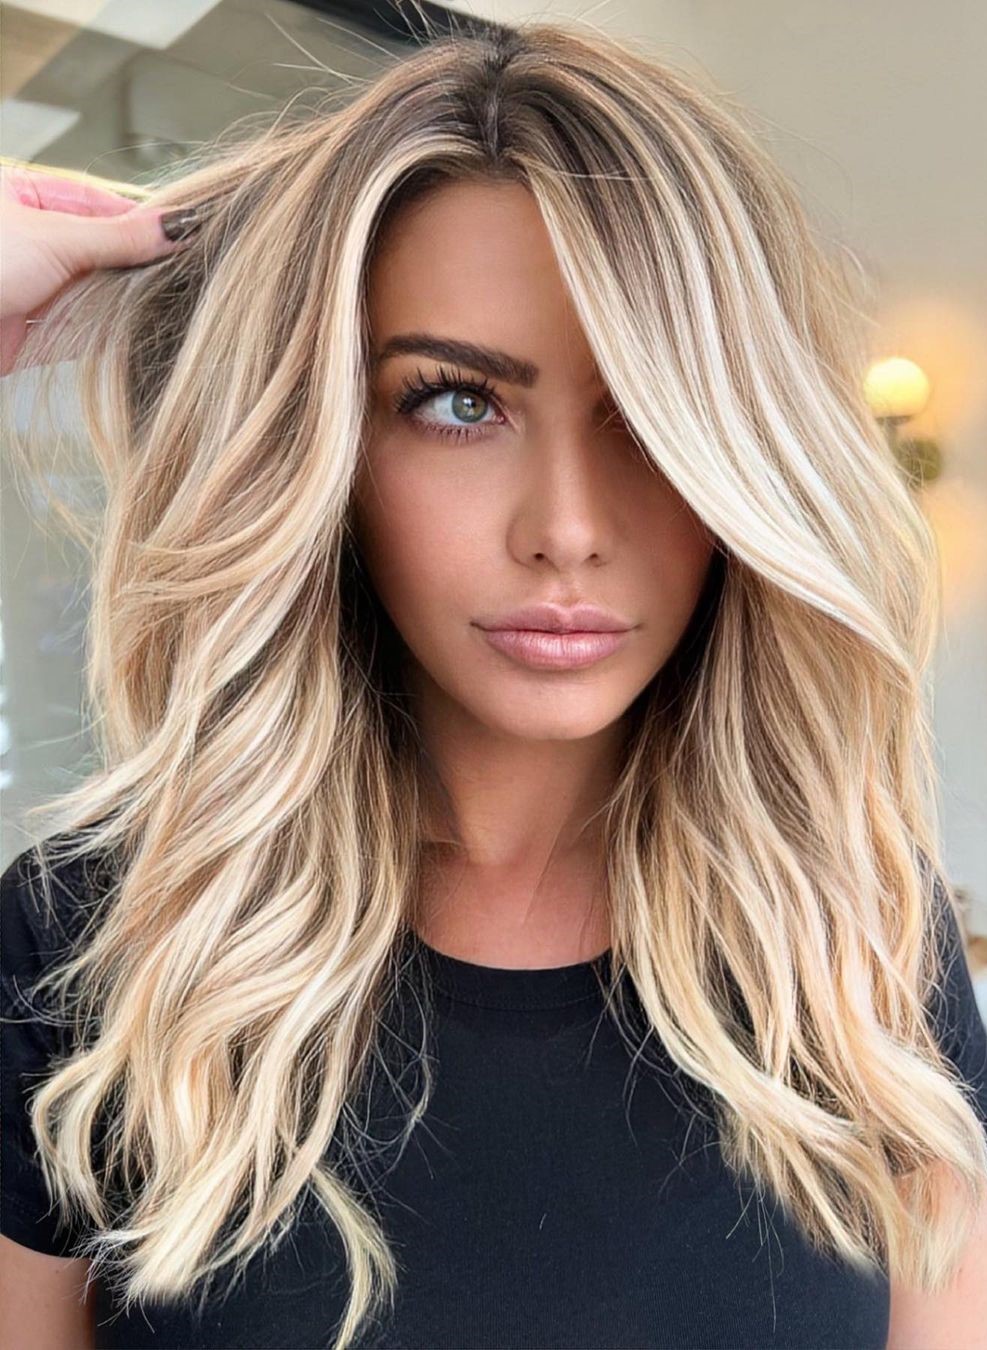 33 Blonde hair colours Every shade from ash to dark blonde